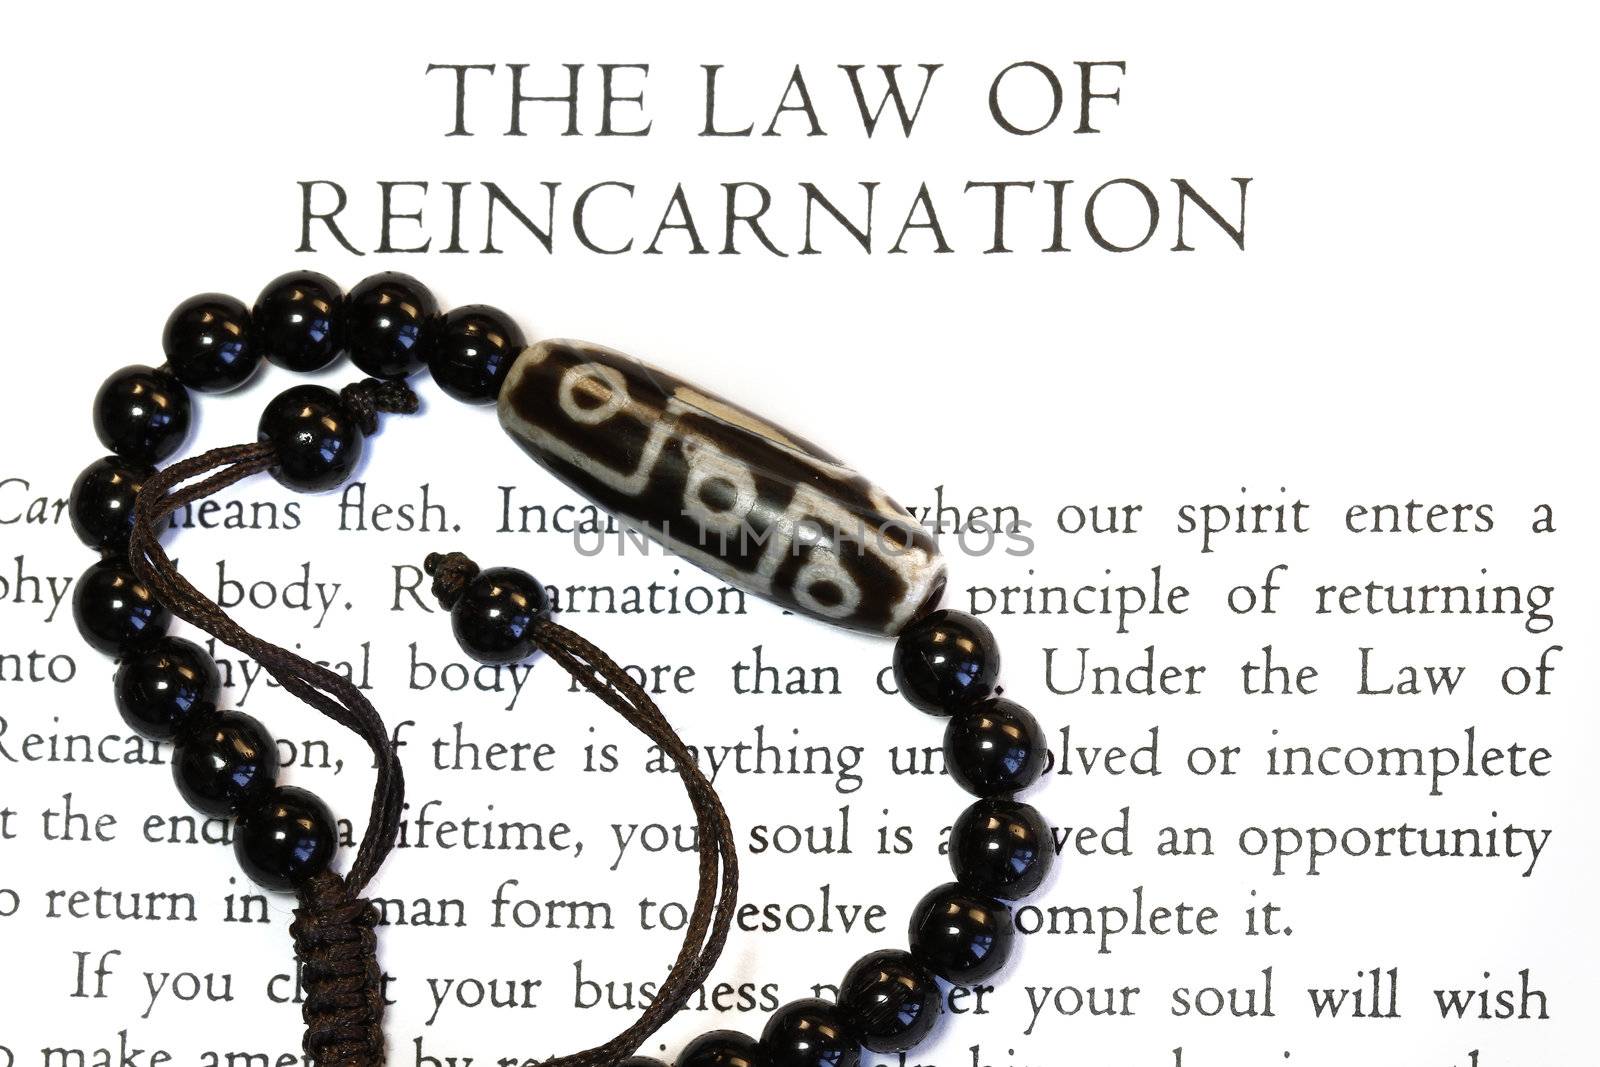 The law of Reincarnation concept- for many religion uses.